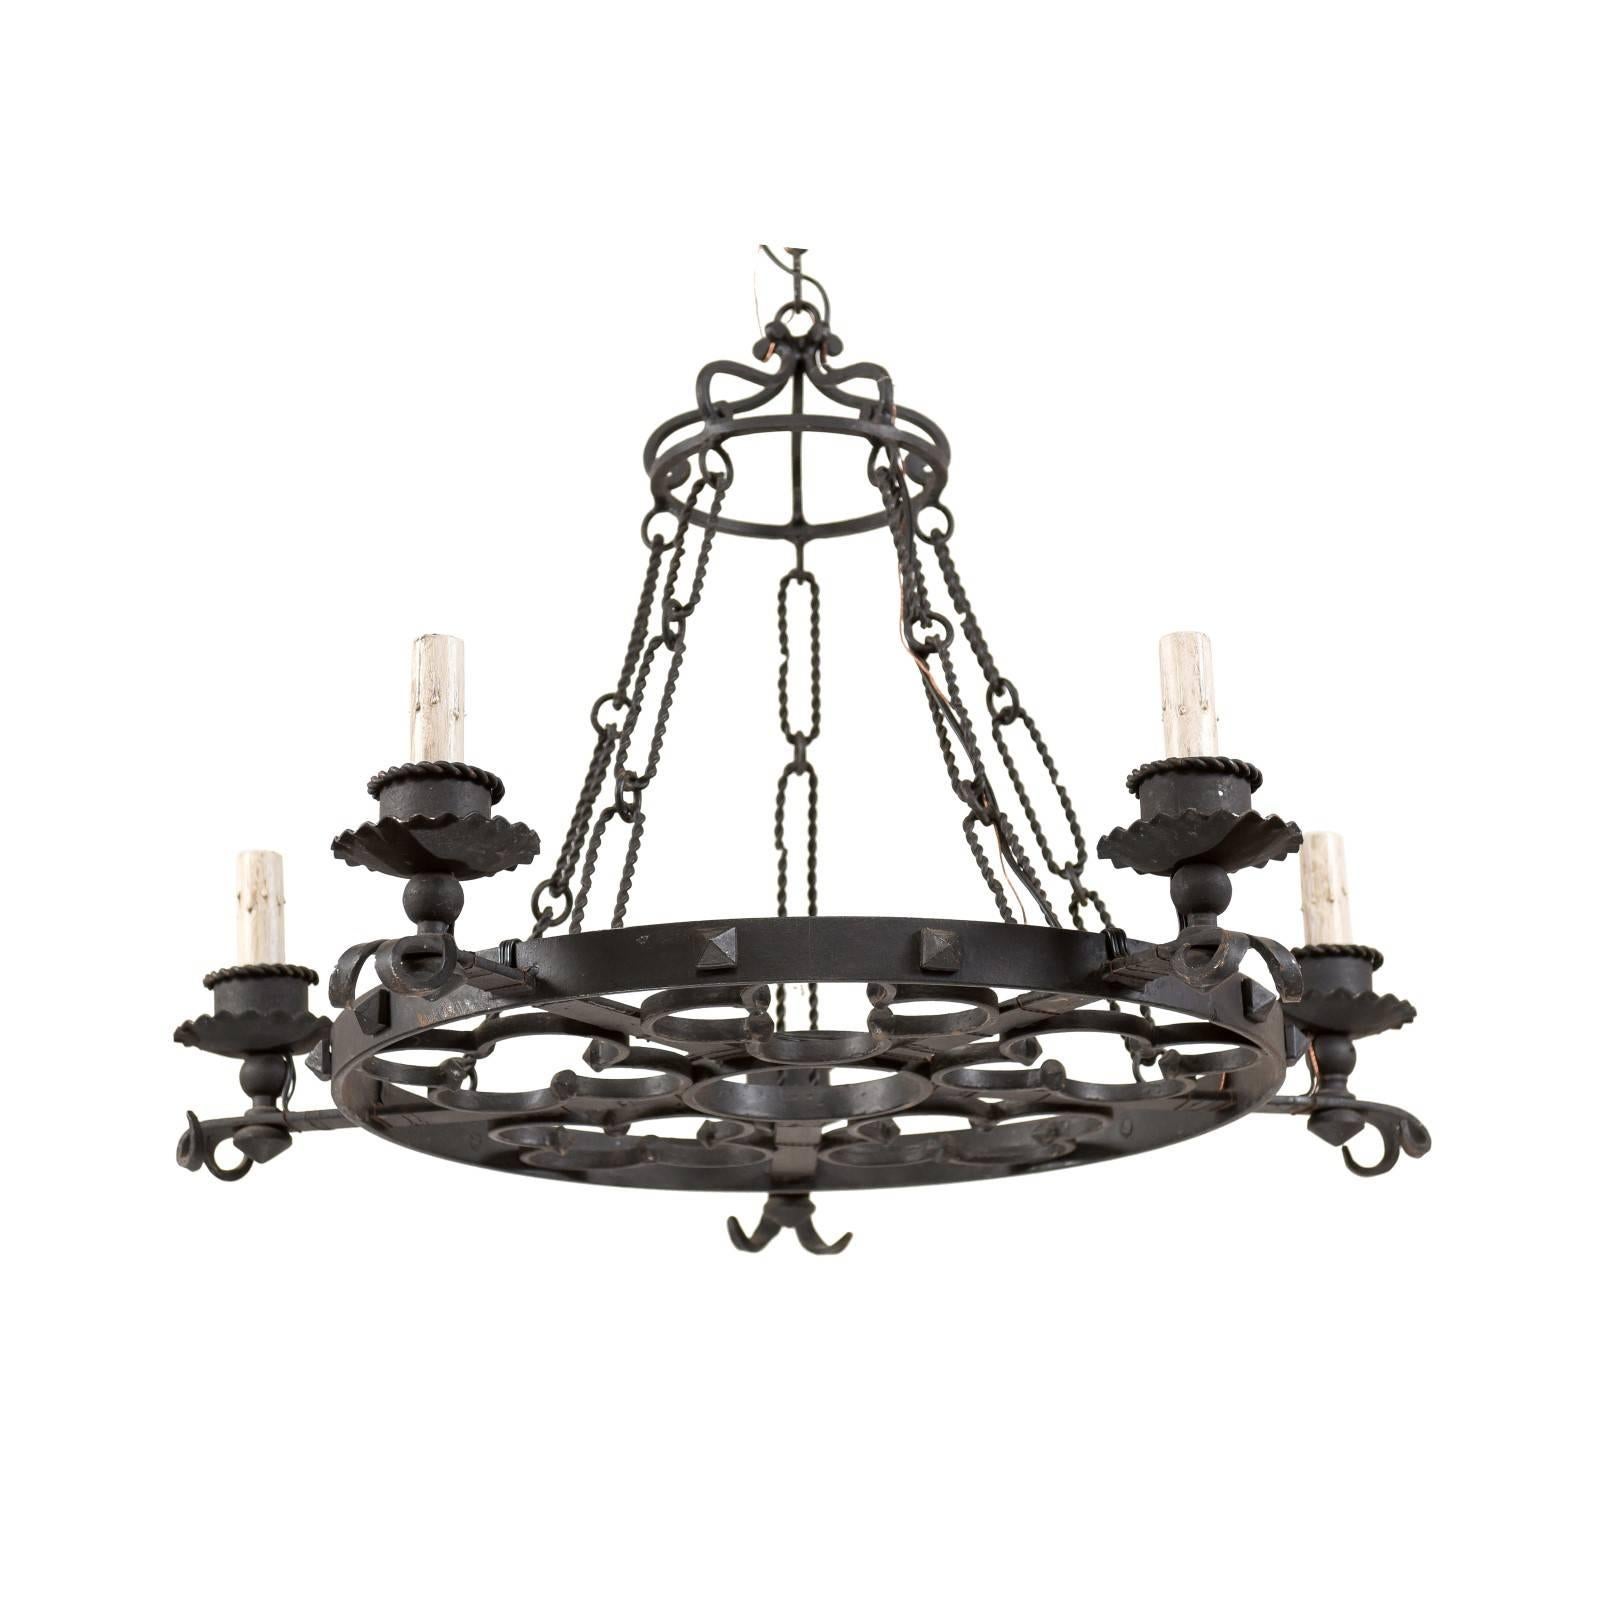 French Midcentury Forged Iron Chandelier with Quatrefoil Clover Motifs